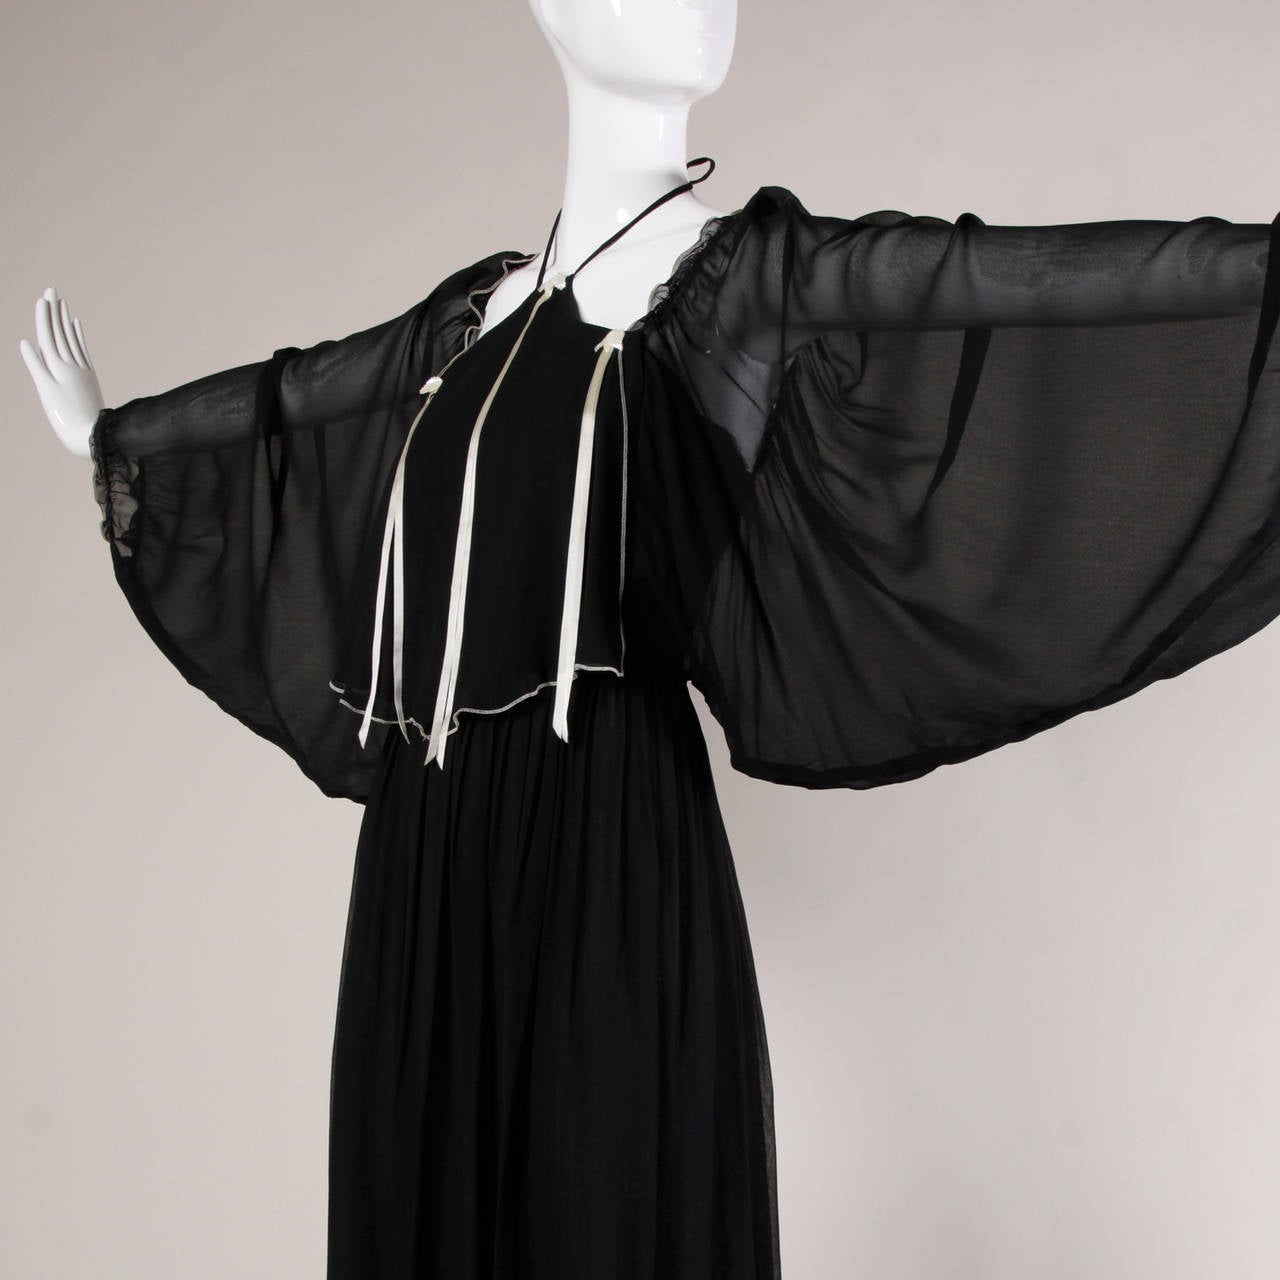 Unique 1970s black maxi dress with bat wing sleeves and a halter neckline.

Details:

Fully Lined
Back Zip and Hook Closure/ Ties At Neck
Marked Size: Not Marked
Estimated Size: Medium
Color: Black/ Pale Beige Ivory/ Iridescent Ivory, Pastel